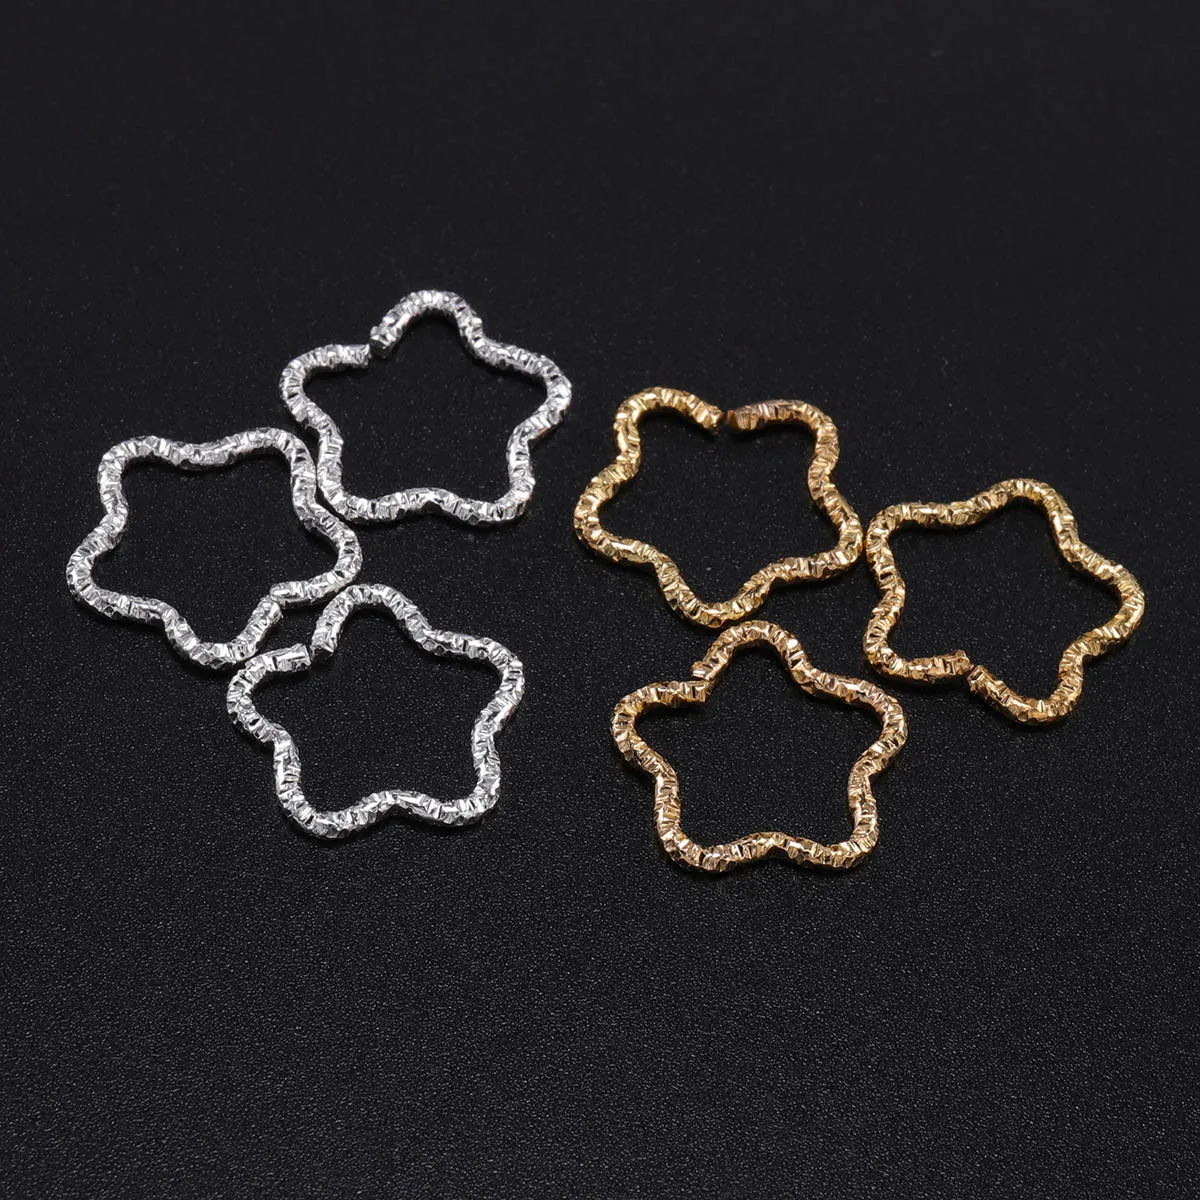 50pcs/lot 16.5mm New Style Silver Gold star Jump Rings Twisted Split Rings Spacer Connectors For Jewelry Making Making Supplies